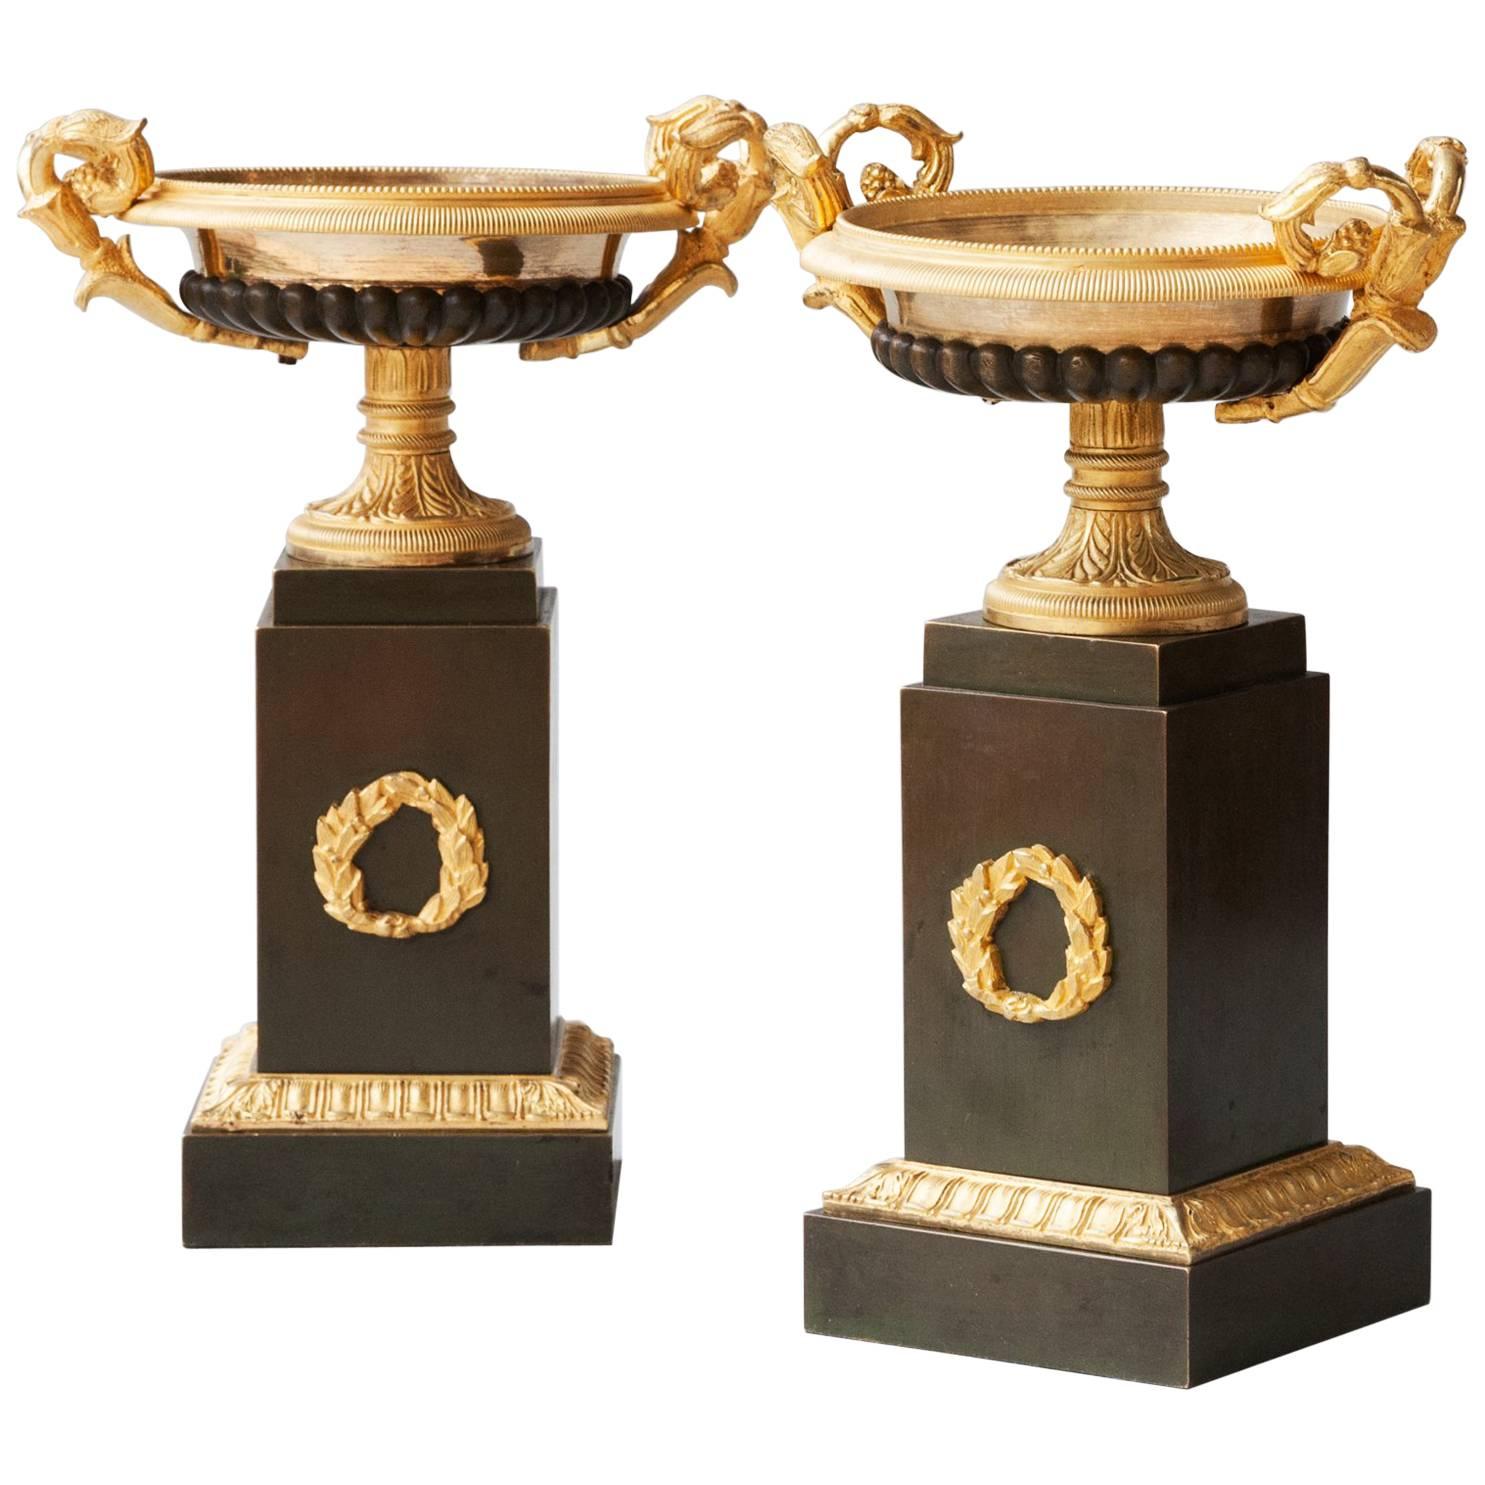 Pair of Restauration Period Gilt and Patinated Bronze Tazza Urns For Sale